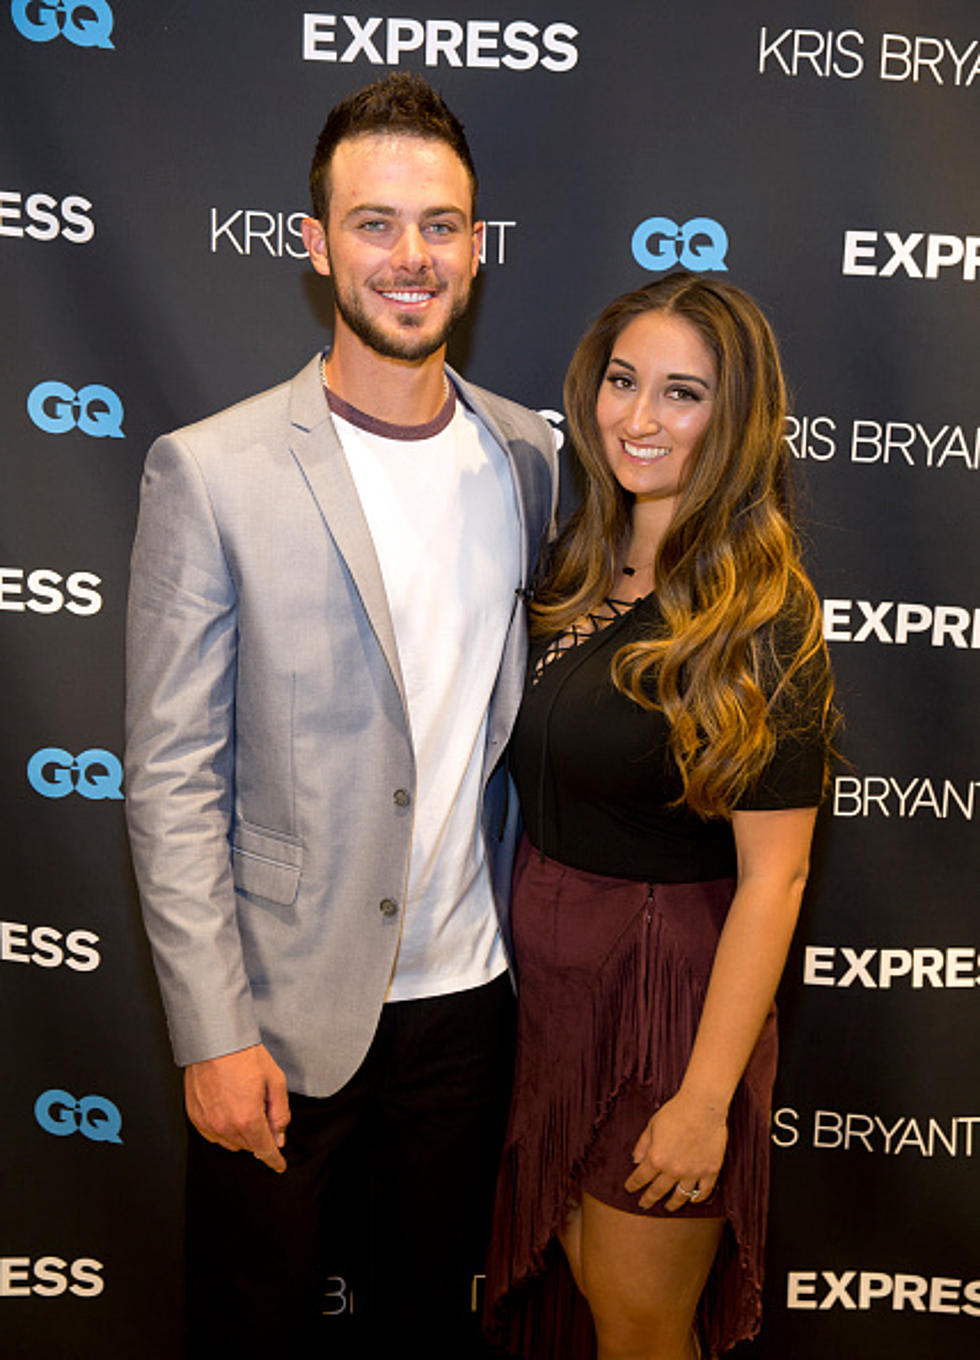 All posts from WalkingFed in Jessica Bryant (Kris Bryant's wife